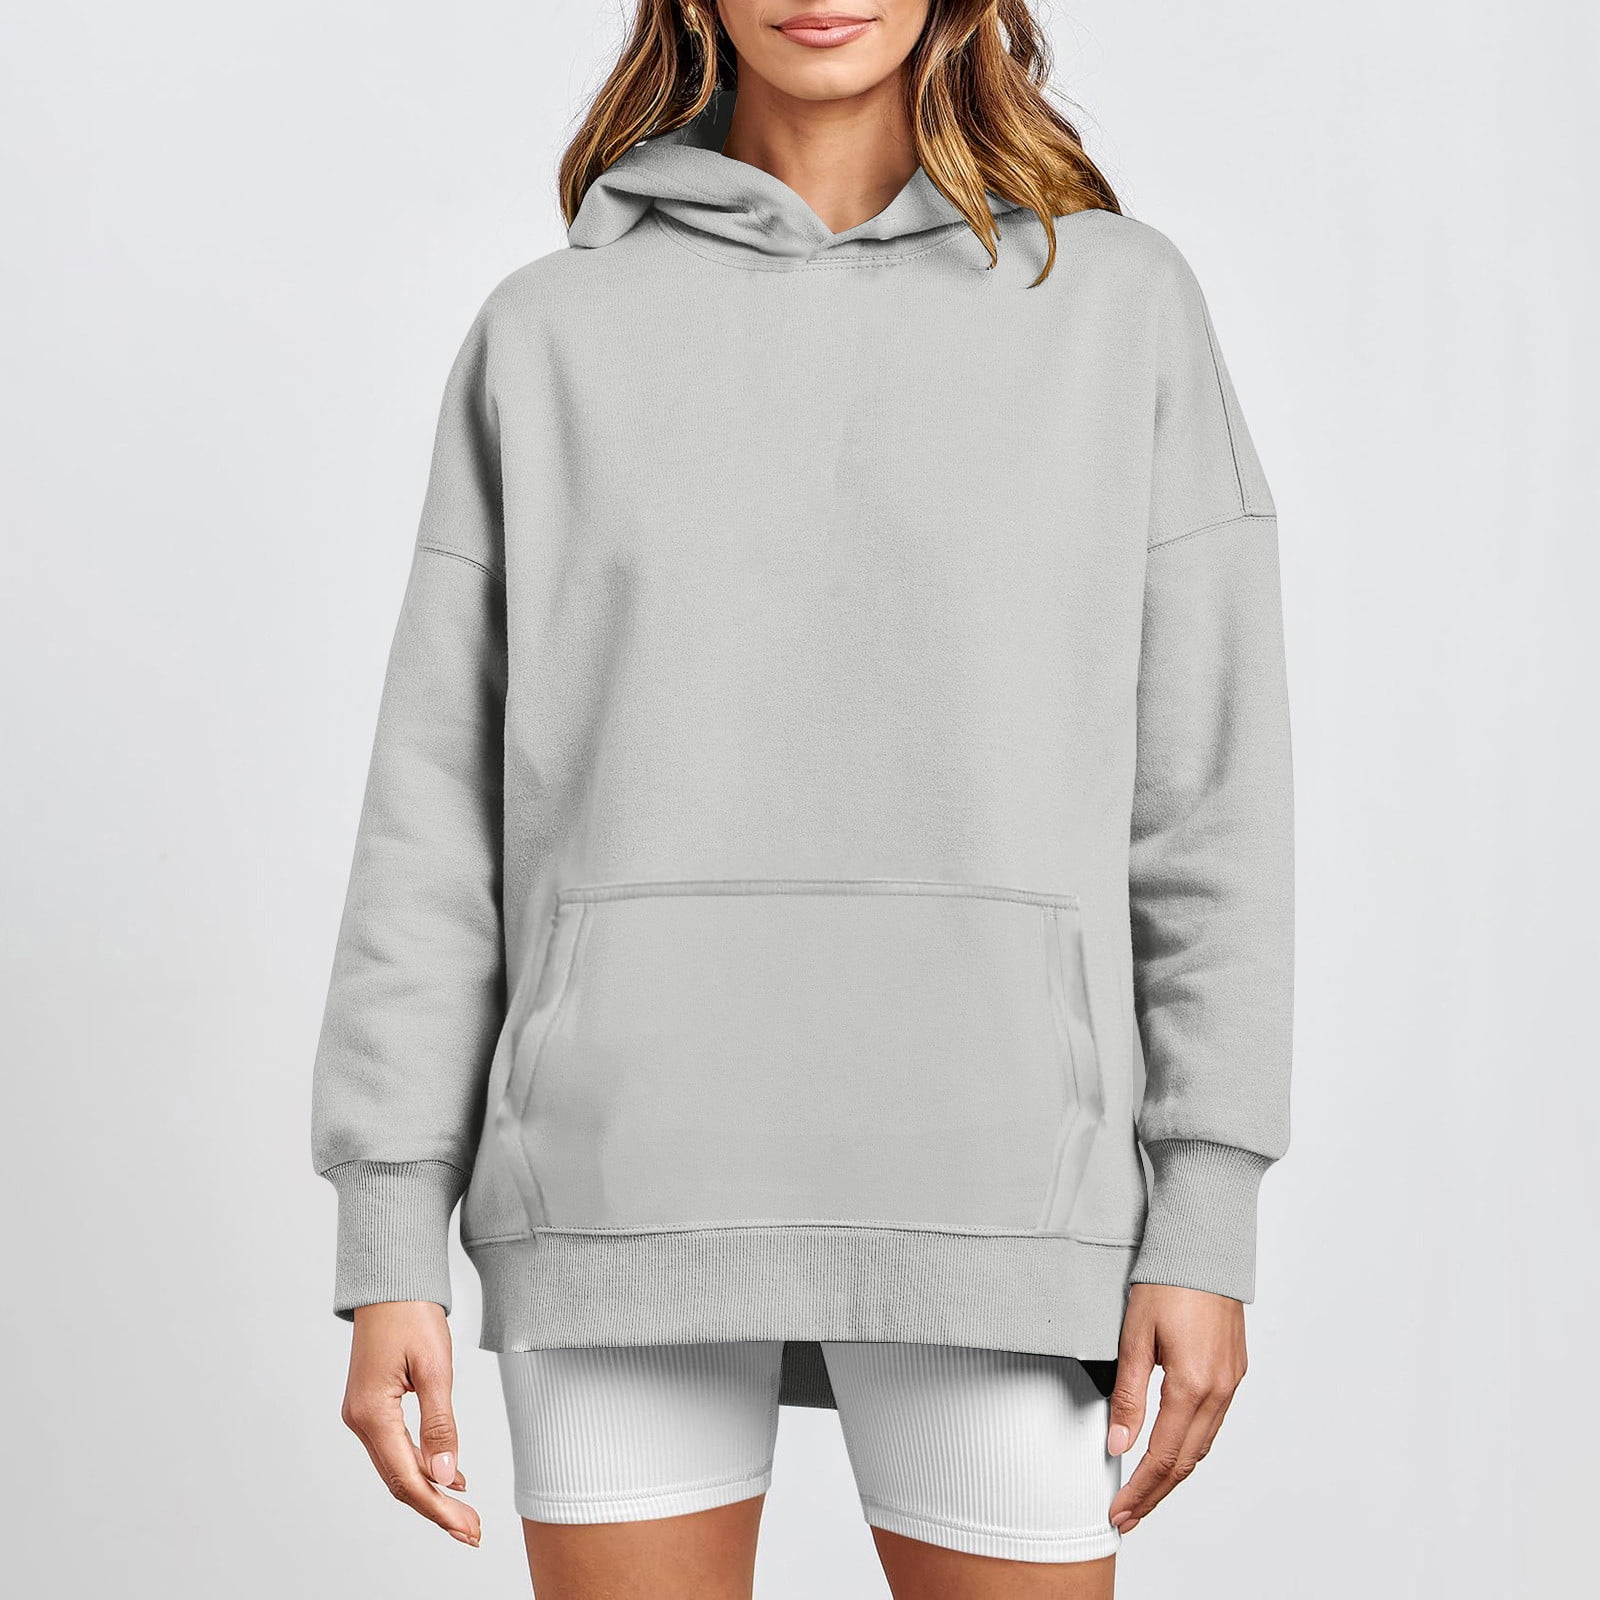 Womens Oversized XXL Grey Sweatshirt Womens For Casual Spring And Autumn  Wear From Freea, $42.31